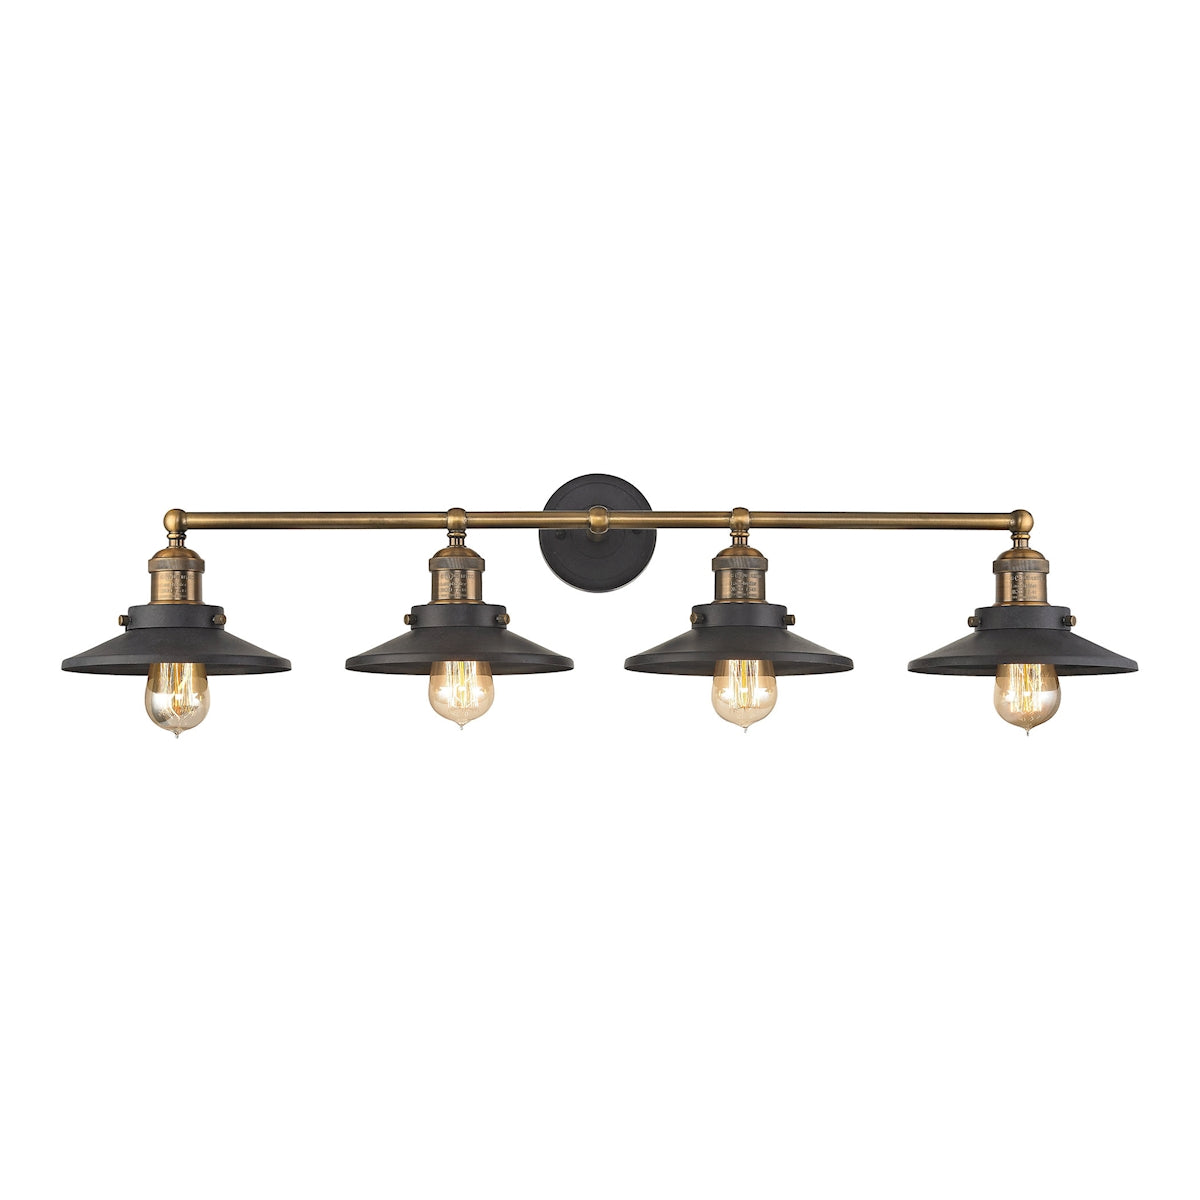 ELK Lighting 67183/4 English Pub 4-Light Vanity Lamp in Antique Brass and Tarnished Graphite with Metal Shade